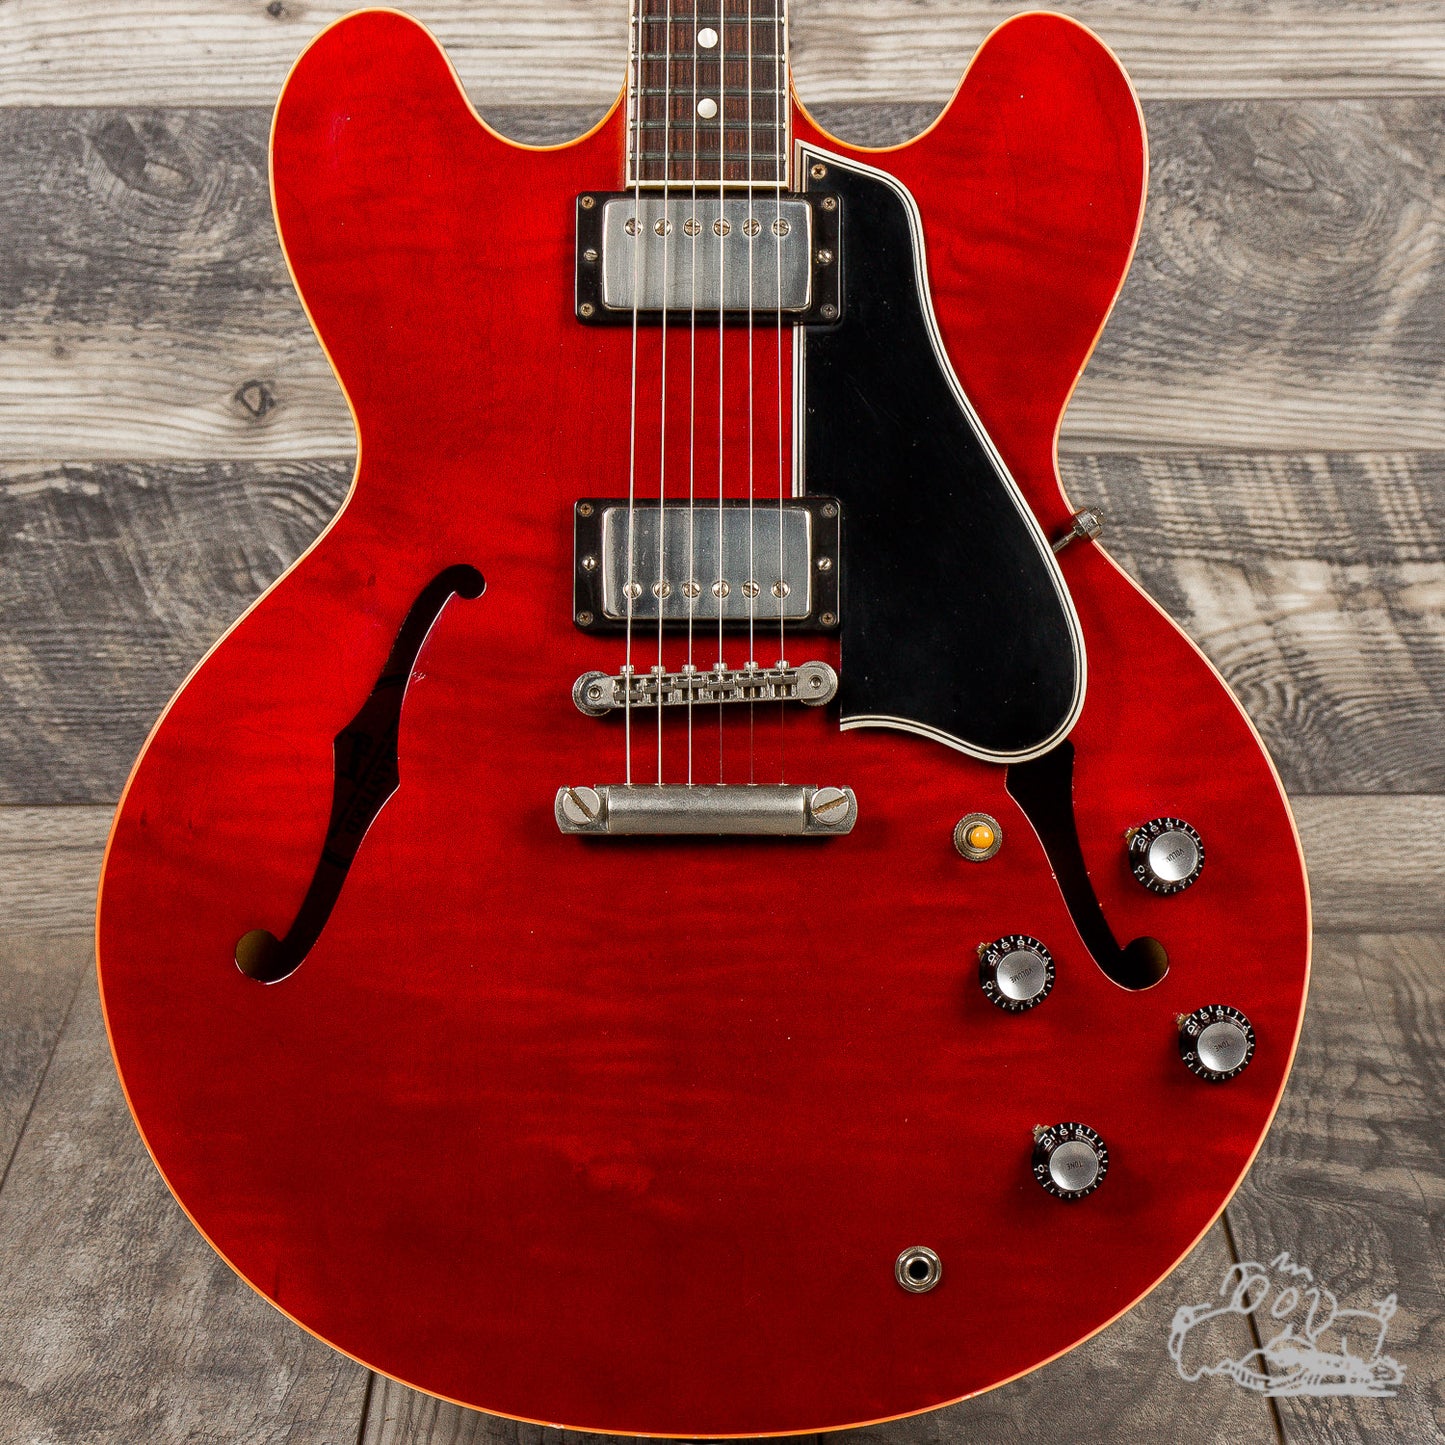 2020 Gibson Custom Shop Rusty Anderson '59 ES-335 with Historic Makeovers Deluxe Upgrade, & Ron Ellis Pups - Make Us An Offer